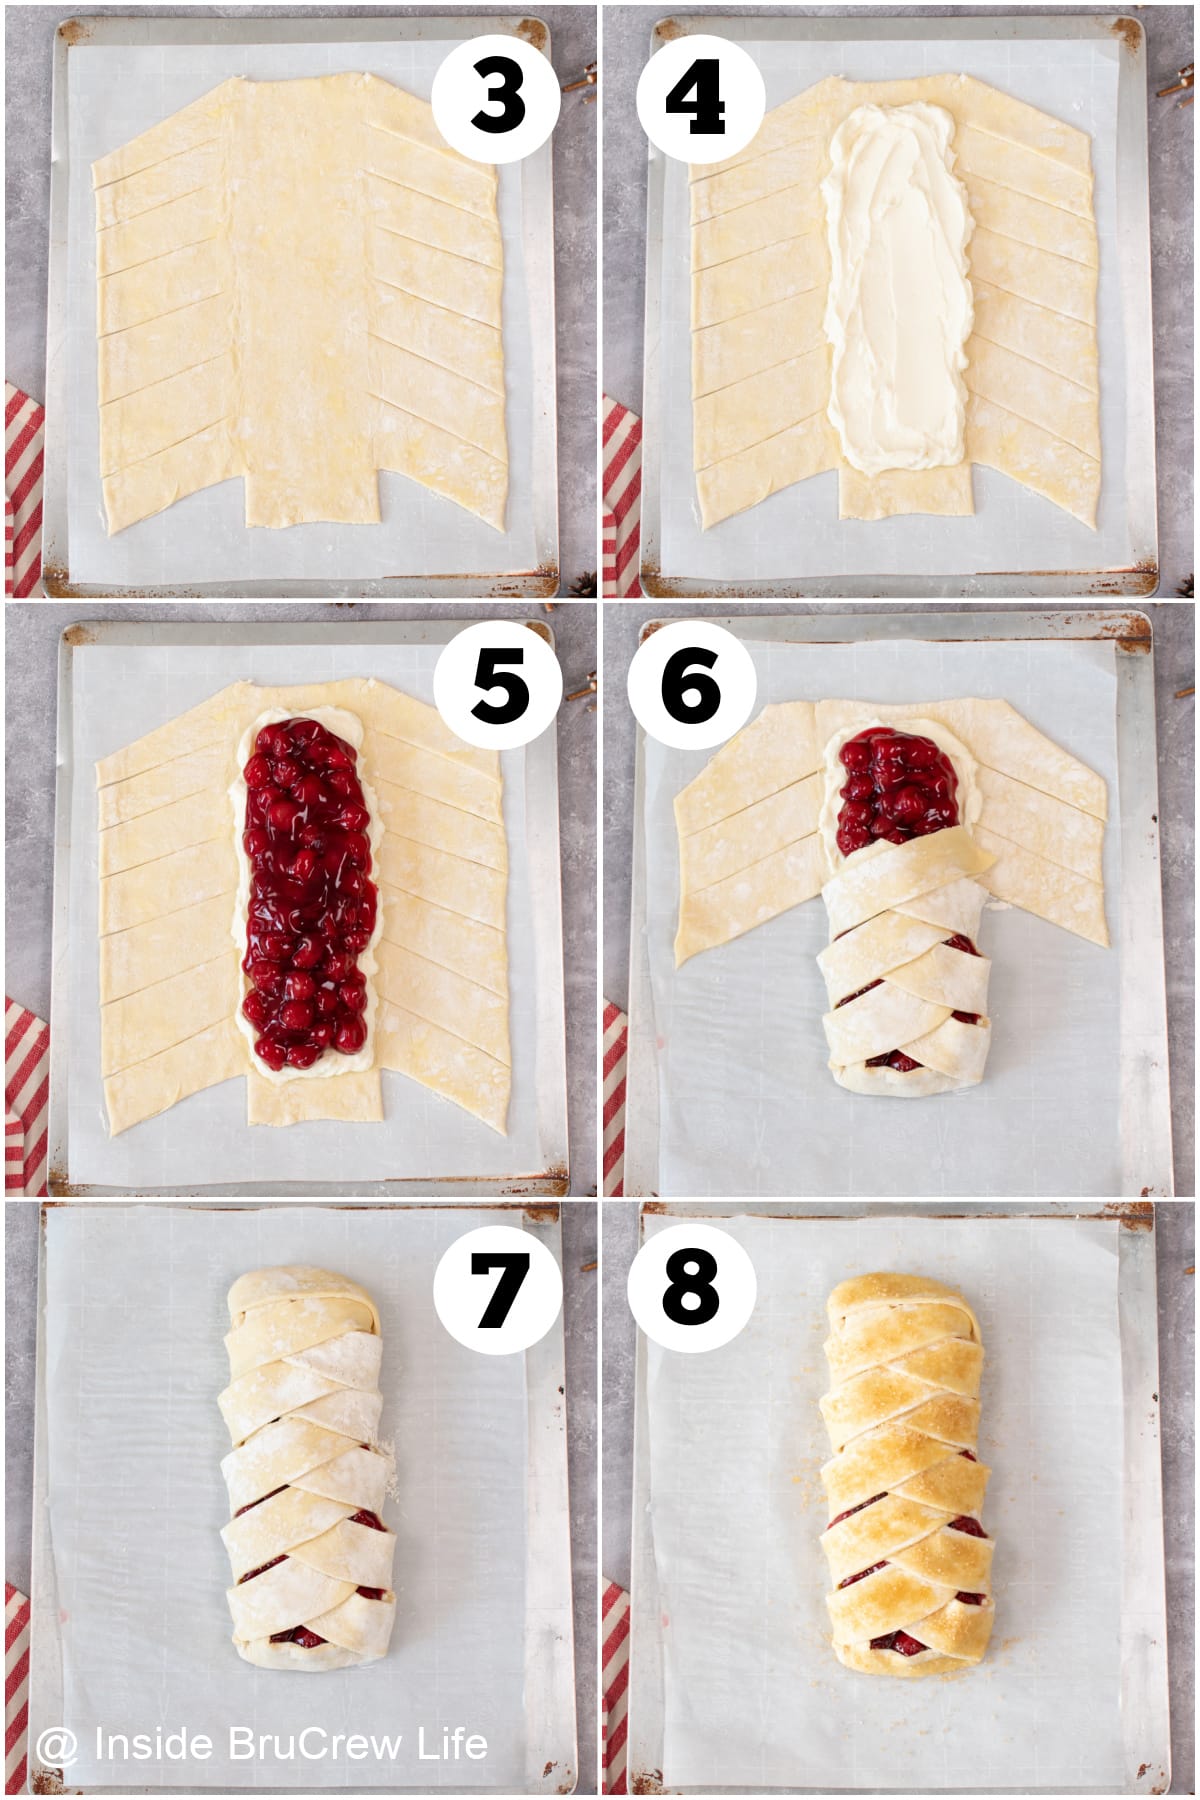 Six pictures collaged together showing how to make a braid with puff pastry.